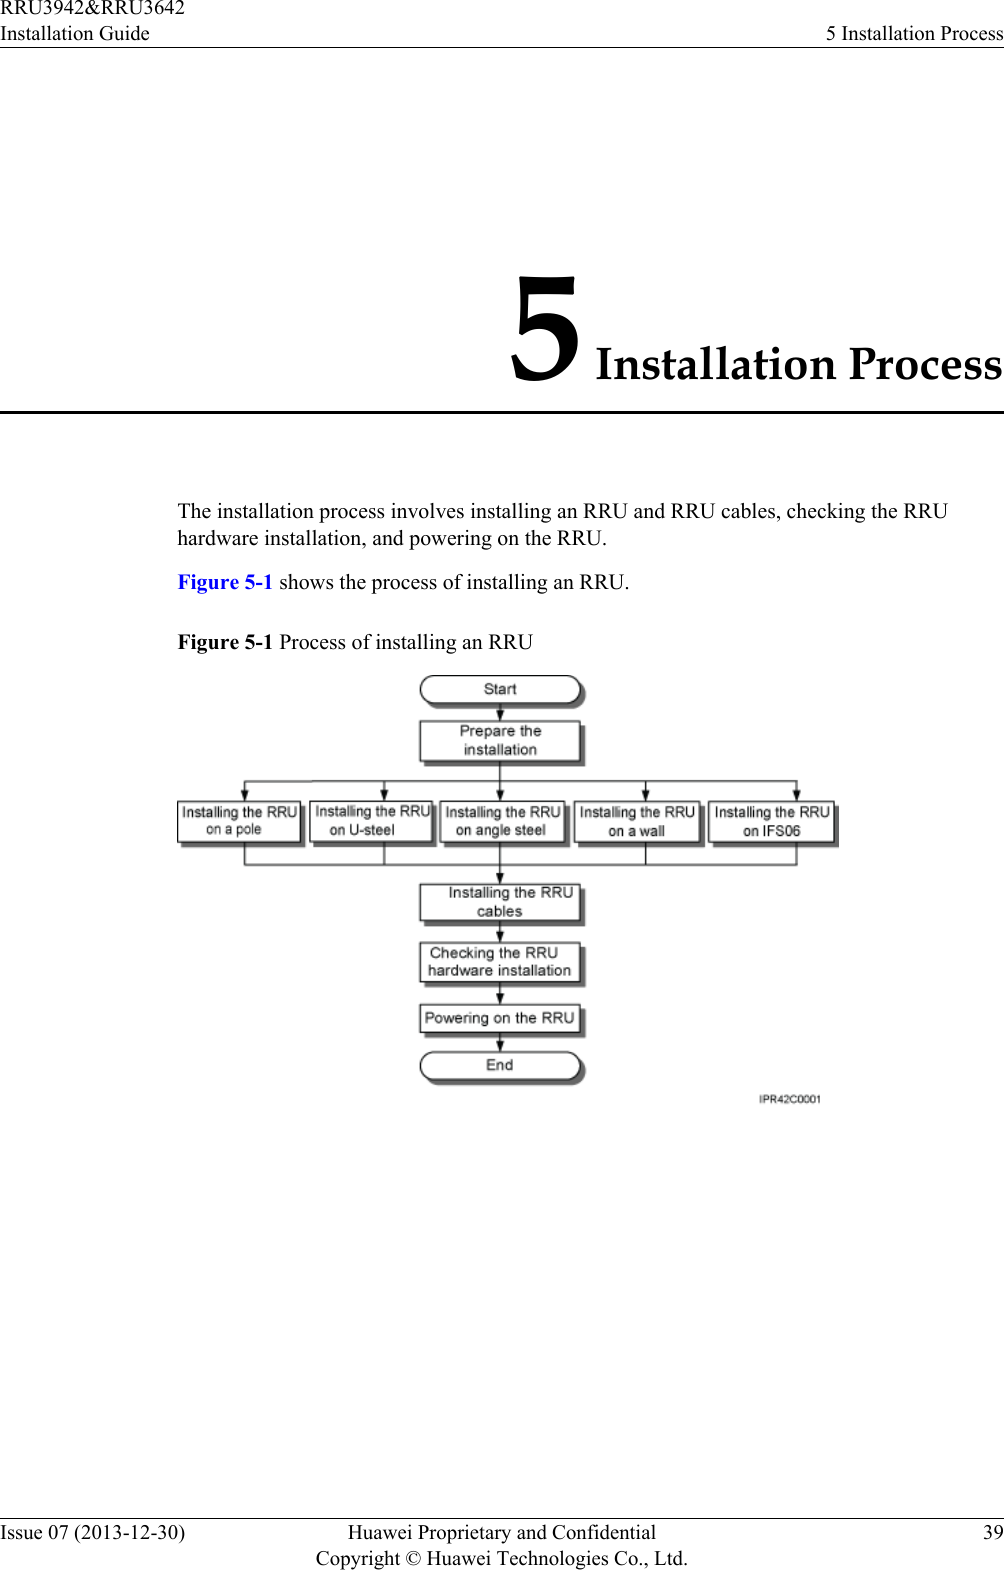 5 Installation ProcessThe installation process involves installing an RRU and RRU cables, checking the RRUhardware installation, and powering on the RRU.Figure 5-1 shows the process of installing an RRU.Figure 5-1 Process of installing an RRURRU3942&amp;RRU3642Installation Guide 5 Installation ProcessIssue 07 (2013-12-30) Huawei Proprietary and ConfidentialCopyright © Huawei Technologies Co., Ltd.39